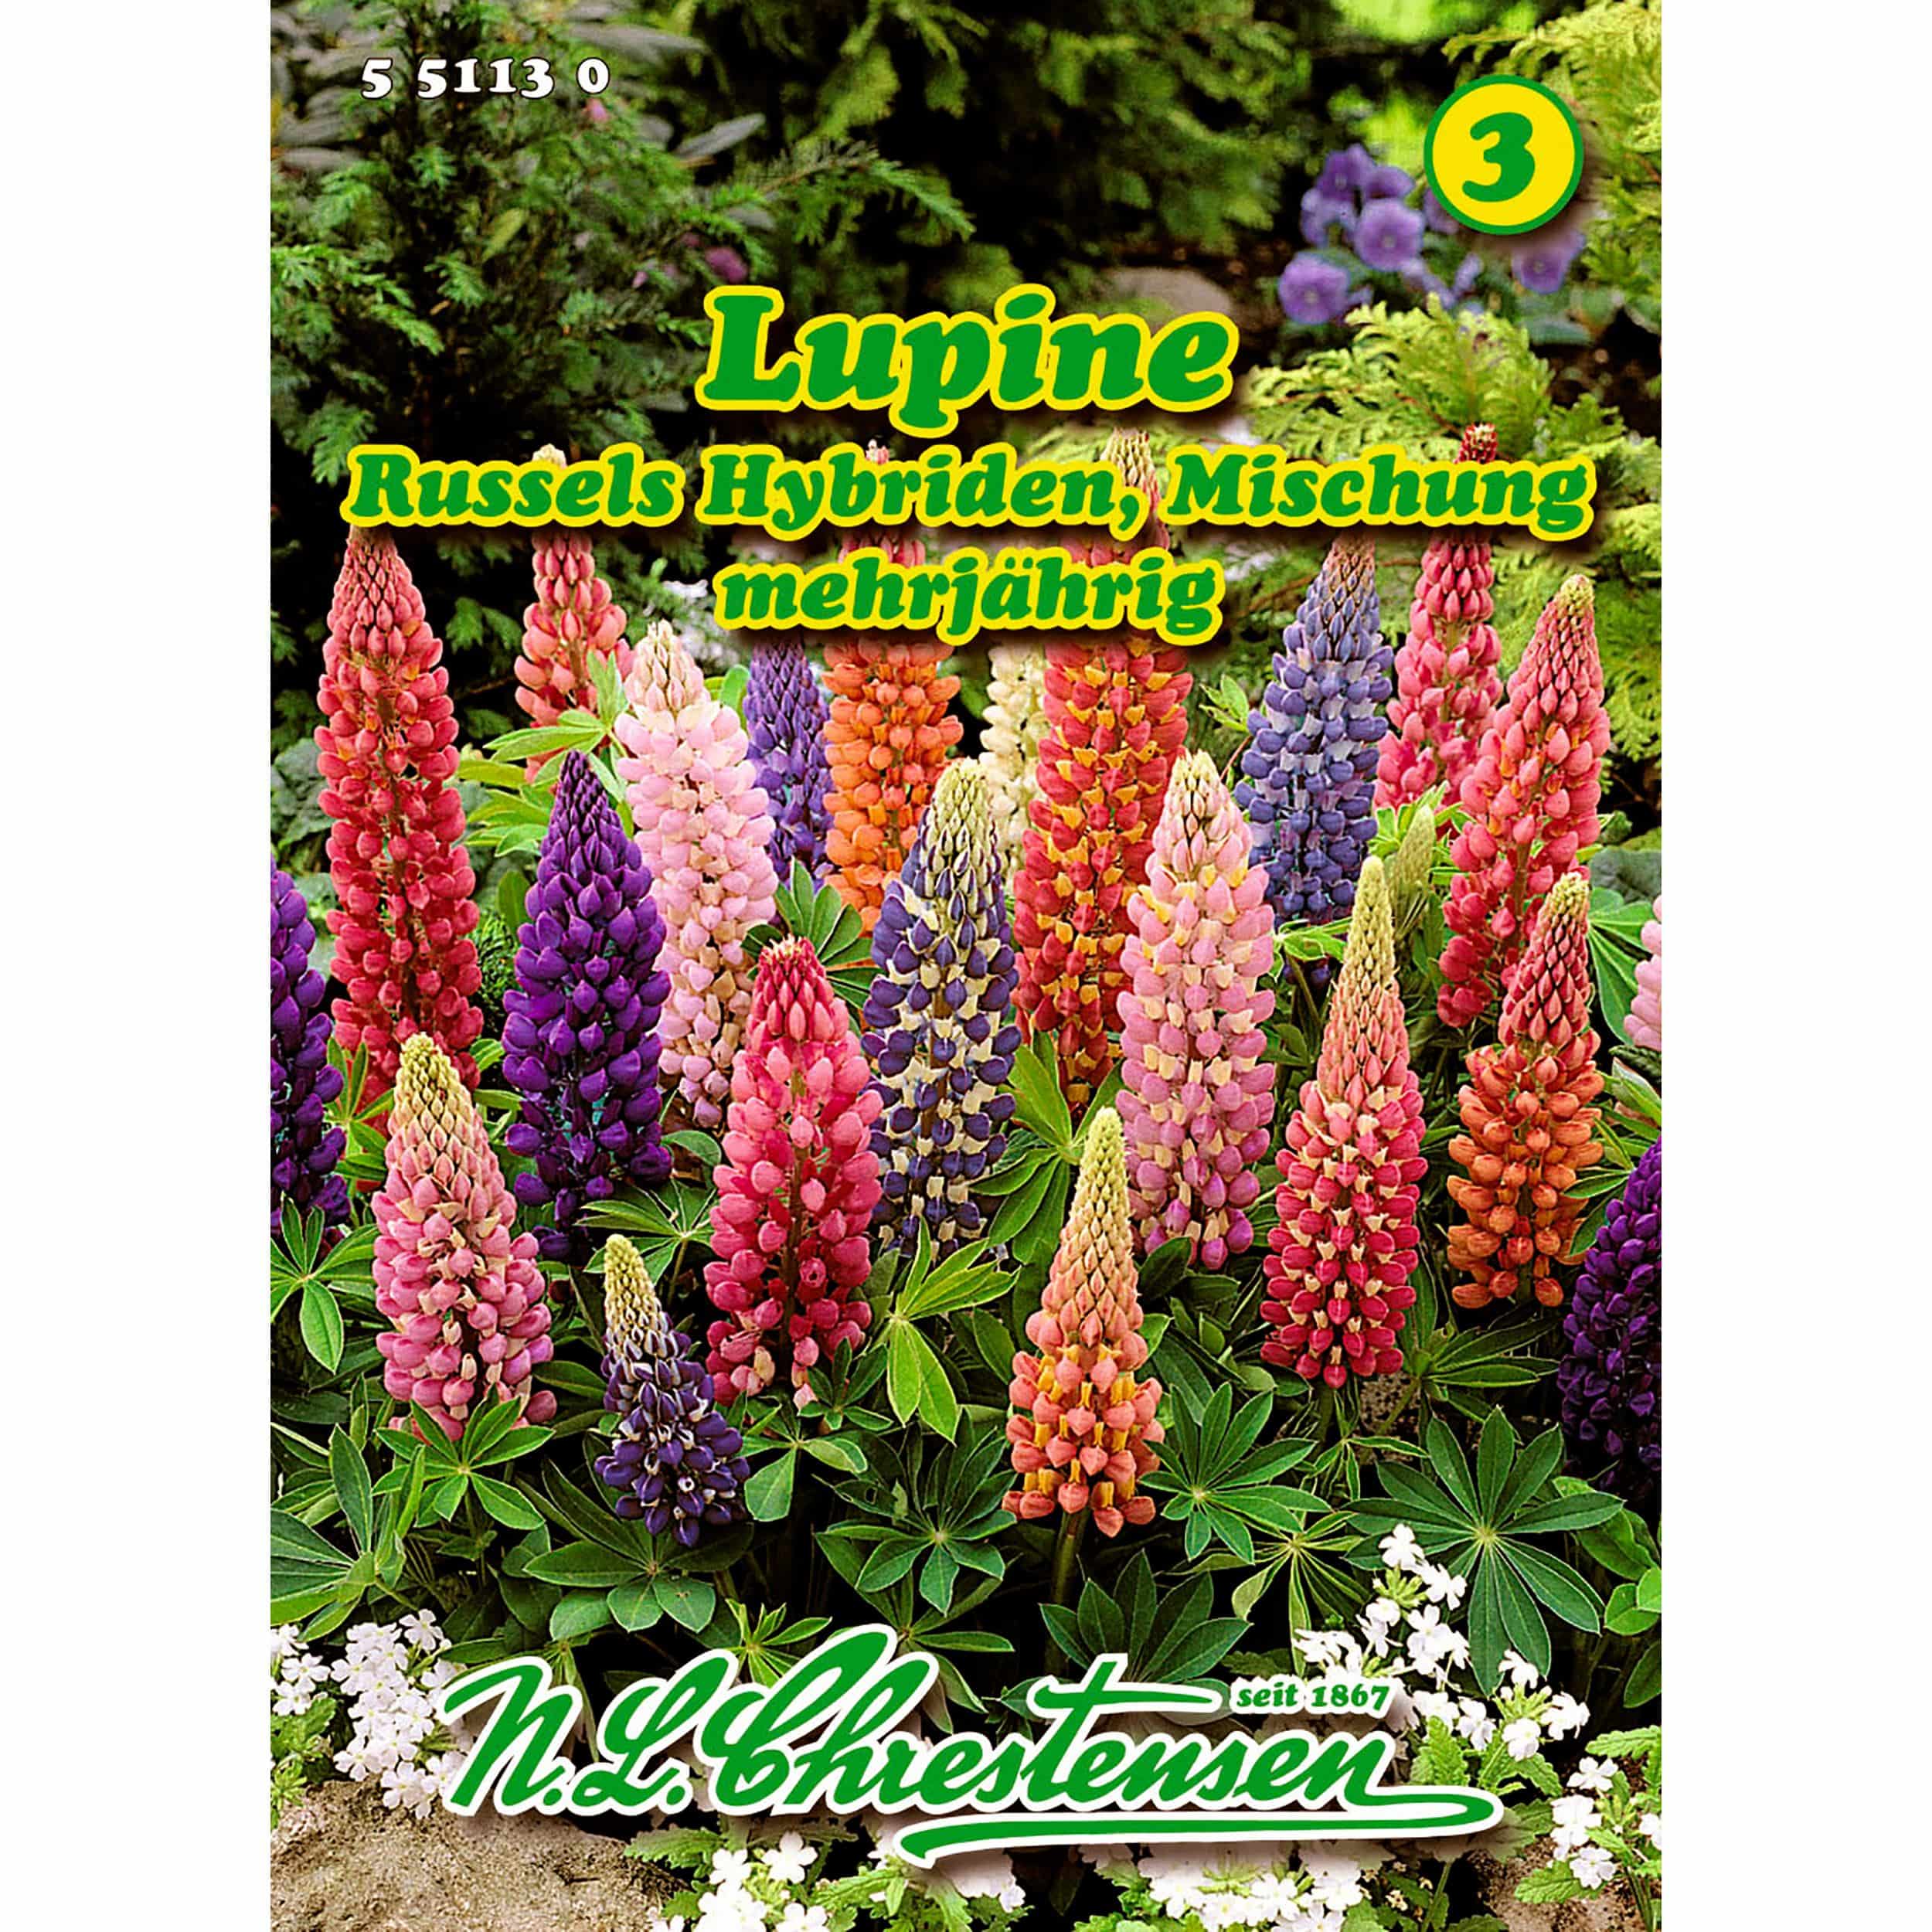 Lupinus polyphyllus, Lupine, Russels Hybr.-Mischung